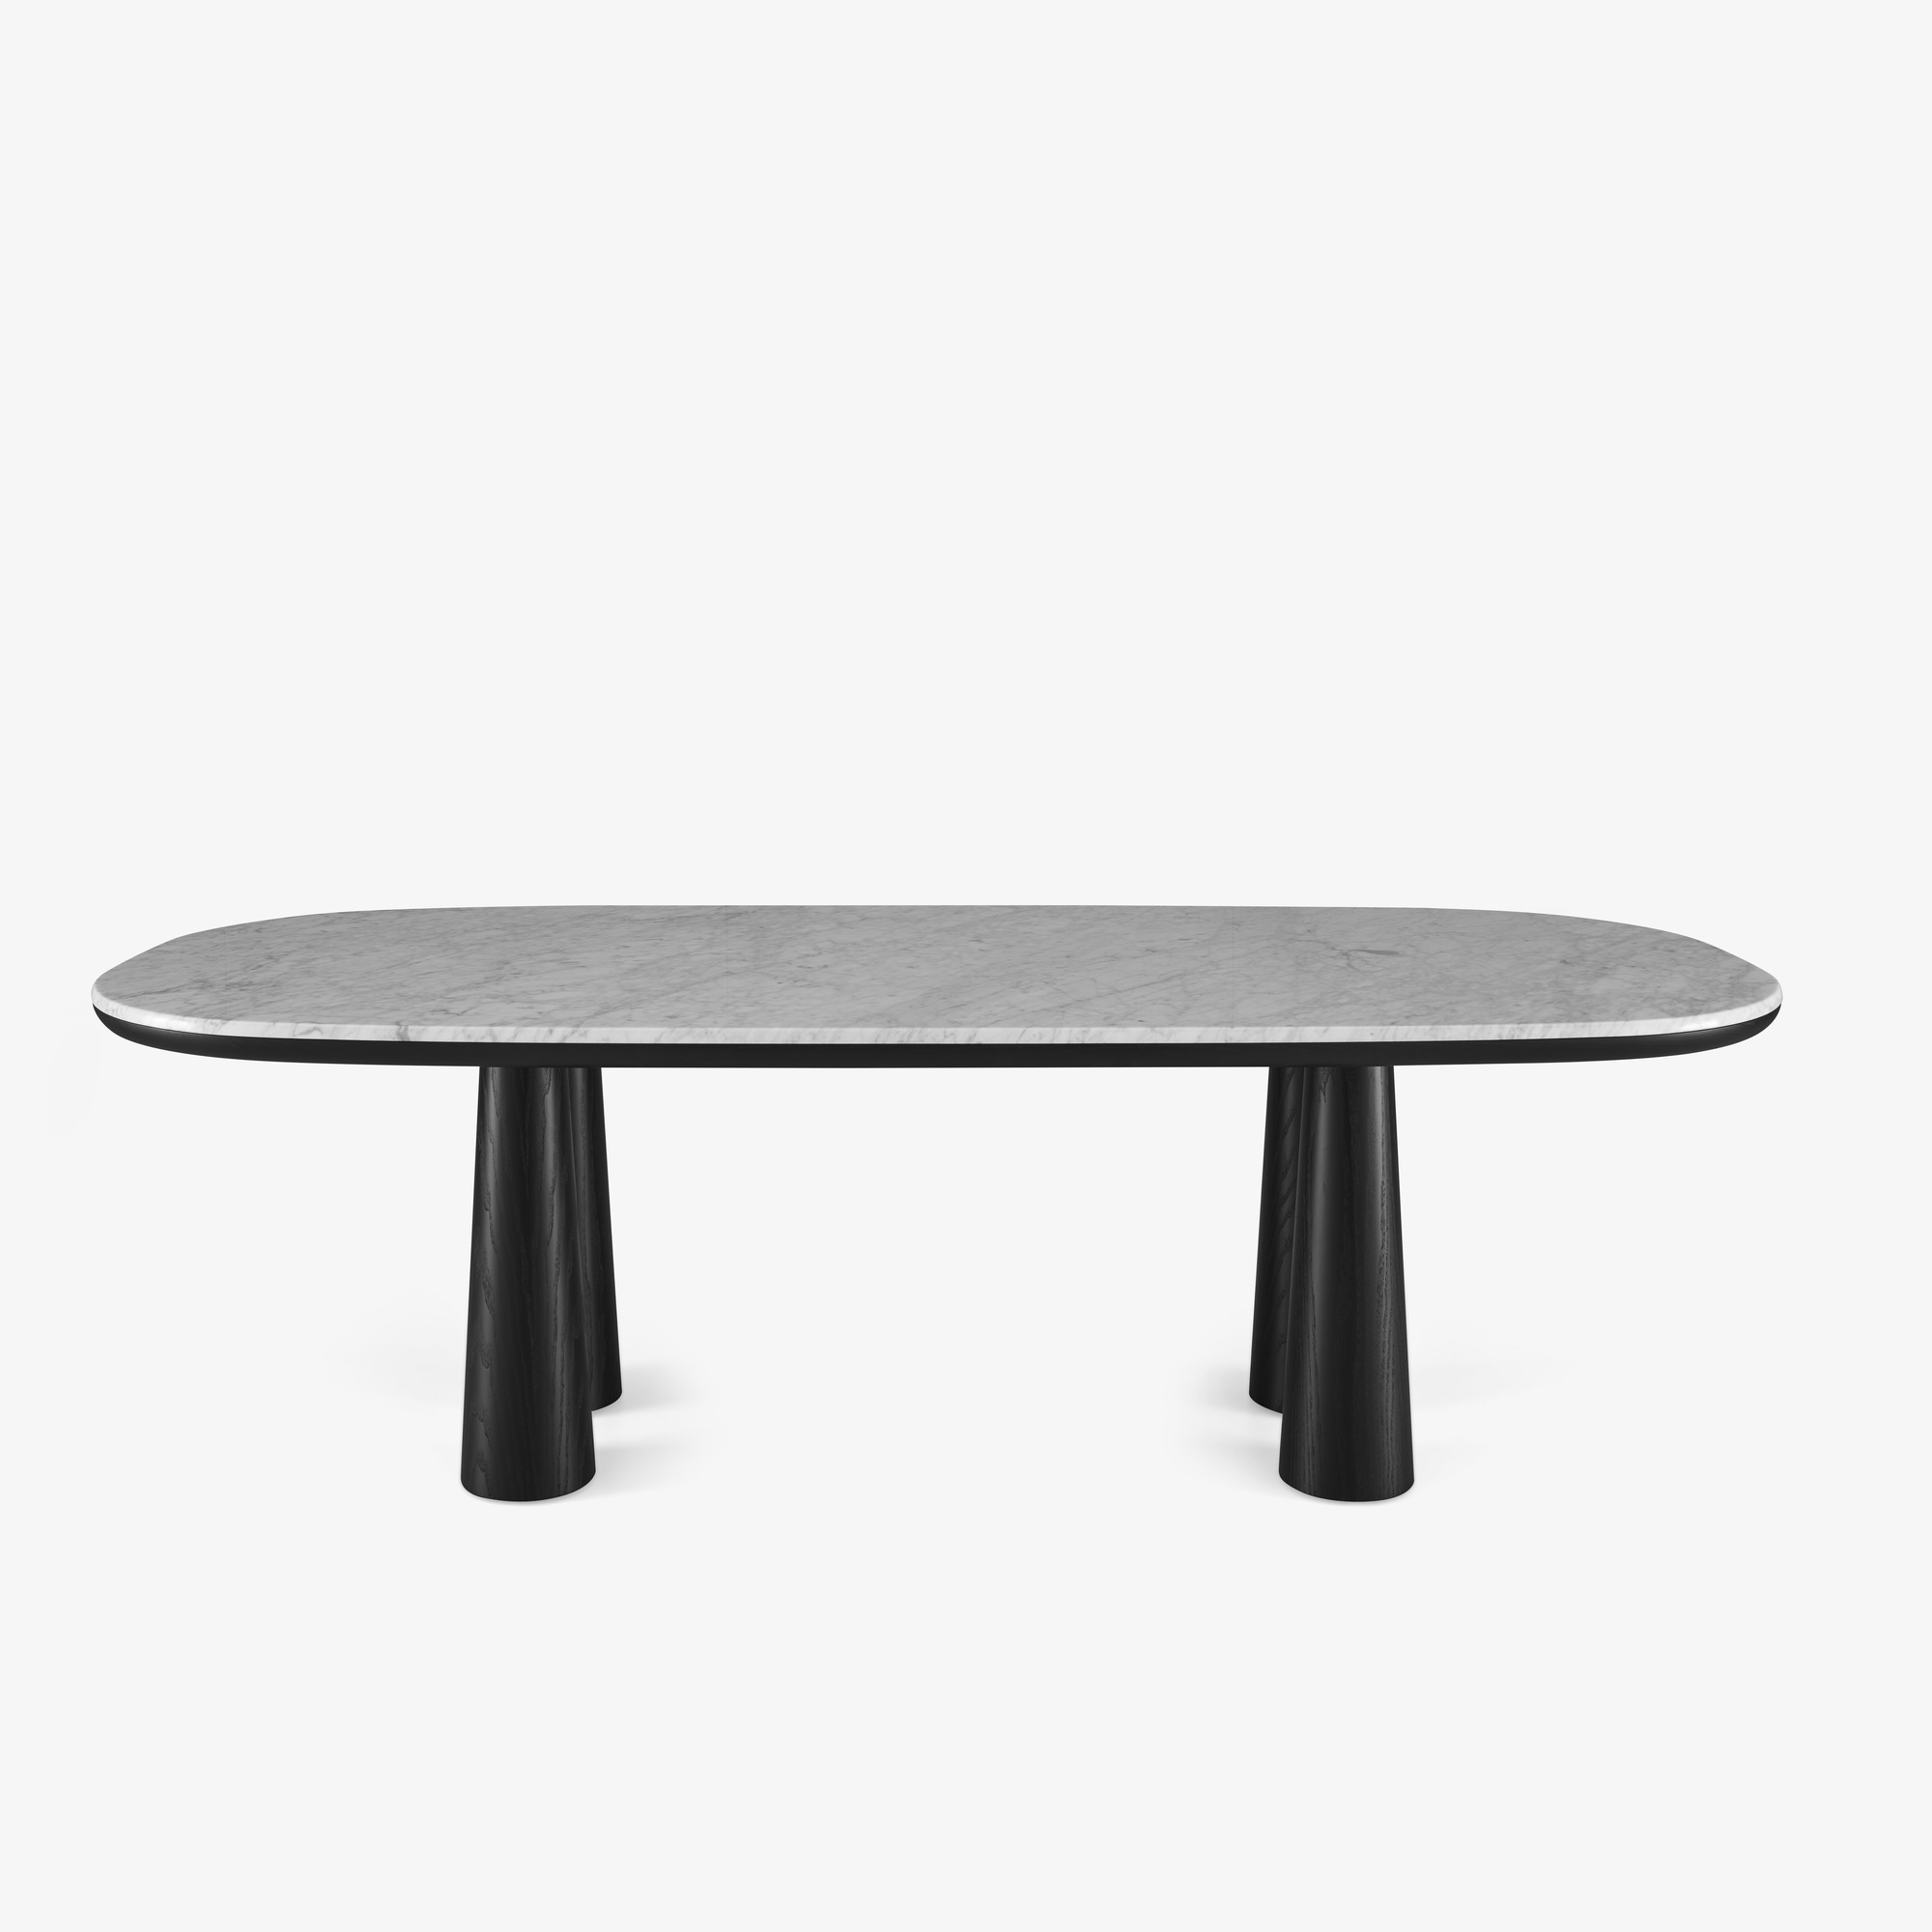 Image DINING TABLE WHITE CARRARA MARBLE BASE IN BLACK STAINED ASH